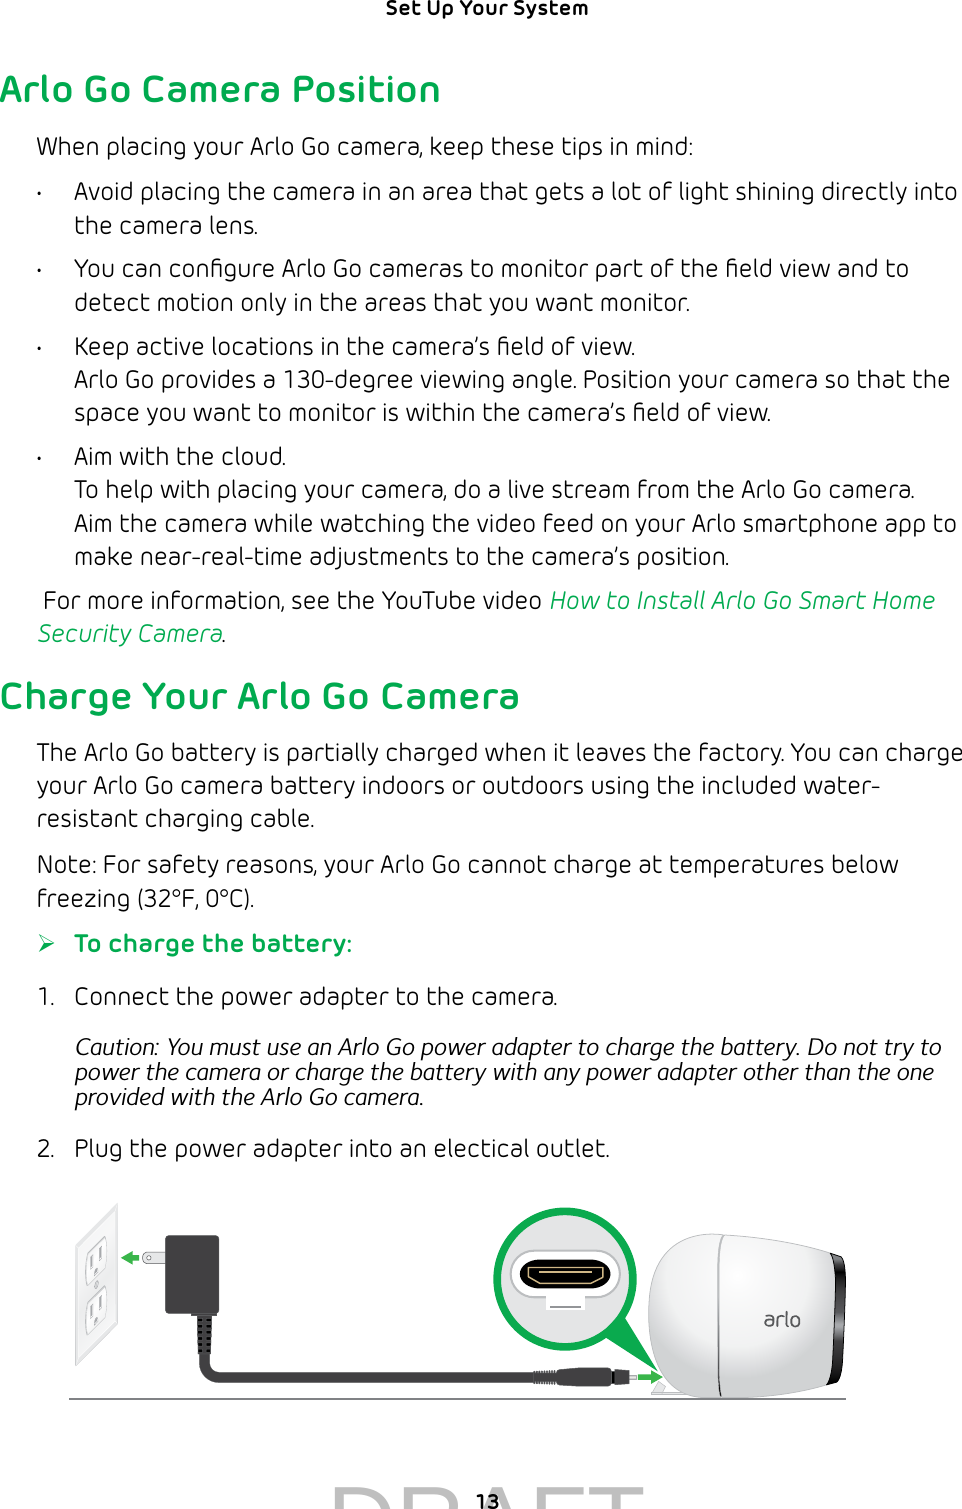 13Set Up Your System Arlo Go Camera PositionWhen placing your Arlo Go camera, keep these tips in mind: •  Avoid placing the camera in an area that gets a lot of light shining directly into the camera lens.•  You can conﬁgure Arlo Go cameras to monitor part of the ﬁeld view and to detect motion only in the areas that you want monitor.•  Keep active locations in the camera’s ﬁeld of view. Arlo Go provides a 130-degree viewing angle. Position your camera so that the space you want to monitor is within the camera’s ﬁeld of view.•  Aim with the cloud. To help with placing your camera, do a live stream from the Arlo Go camera. Aim the camera while watching the video feed on your Arlo smartphone app to make near-real-time adjustments to the camera’s position. For more information, see the YouTube video How to Install Arlo Go Smart Home Security Camera. Charge Your Arlo Go CameraThe Arlo Go battery is partially charged when it leaves the factory. You can charge your Arlo Go camera battery indoors or outdoors using the included water-resistant charging cable. Note: For safety reasons, your Arlo Go cannot charge at temperatures below freezing (32°F, 0°C).  ¾To charge the battery:1.  Connect the power adapter to the camera.Caution: You must use an Arlo Go power adapter to charge the battery. Do not try to power the camera or charge the battery with any power adapter other than the one provided with the Arlo Go camera.2.  Plug the power adapter into an electical outlet.DRAFT